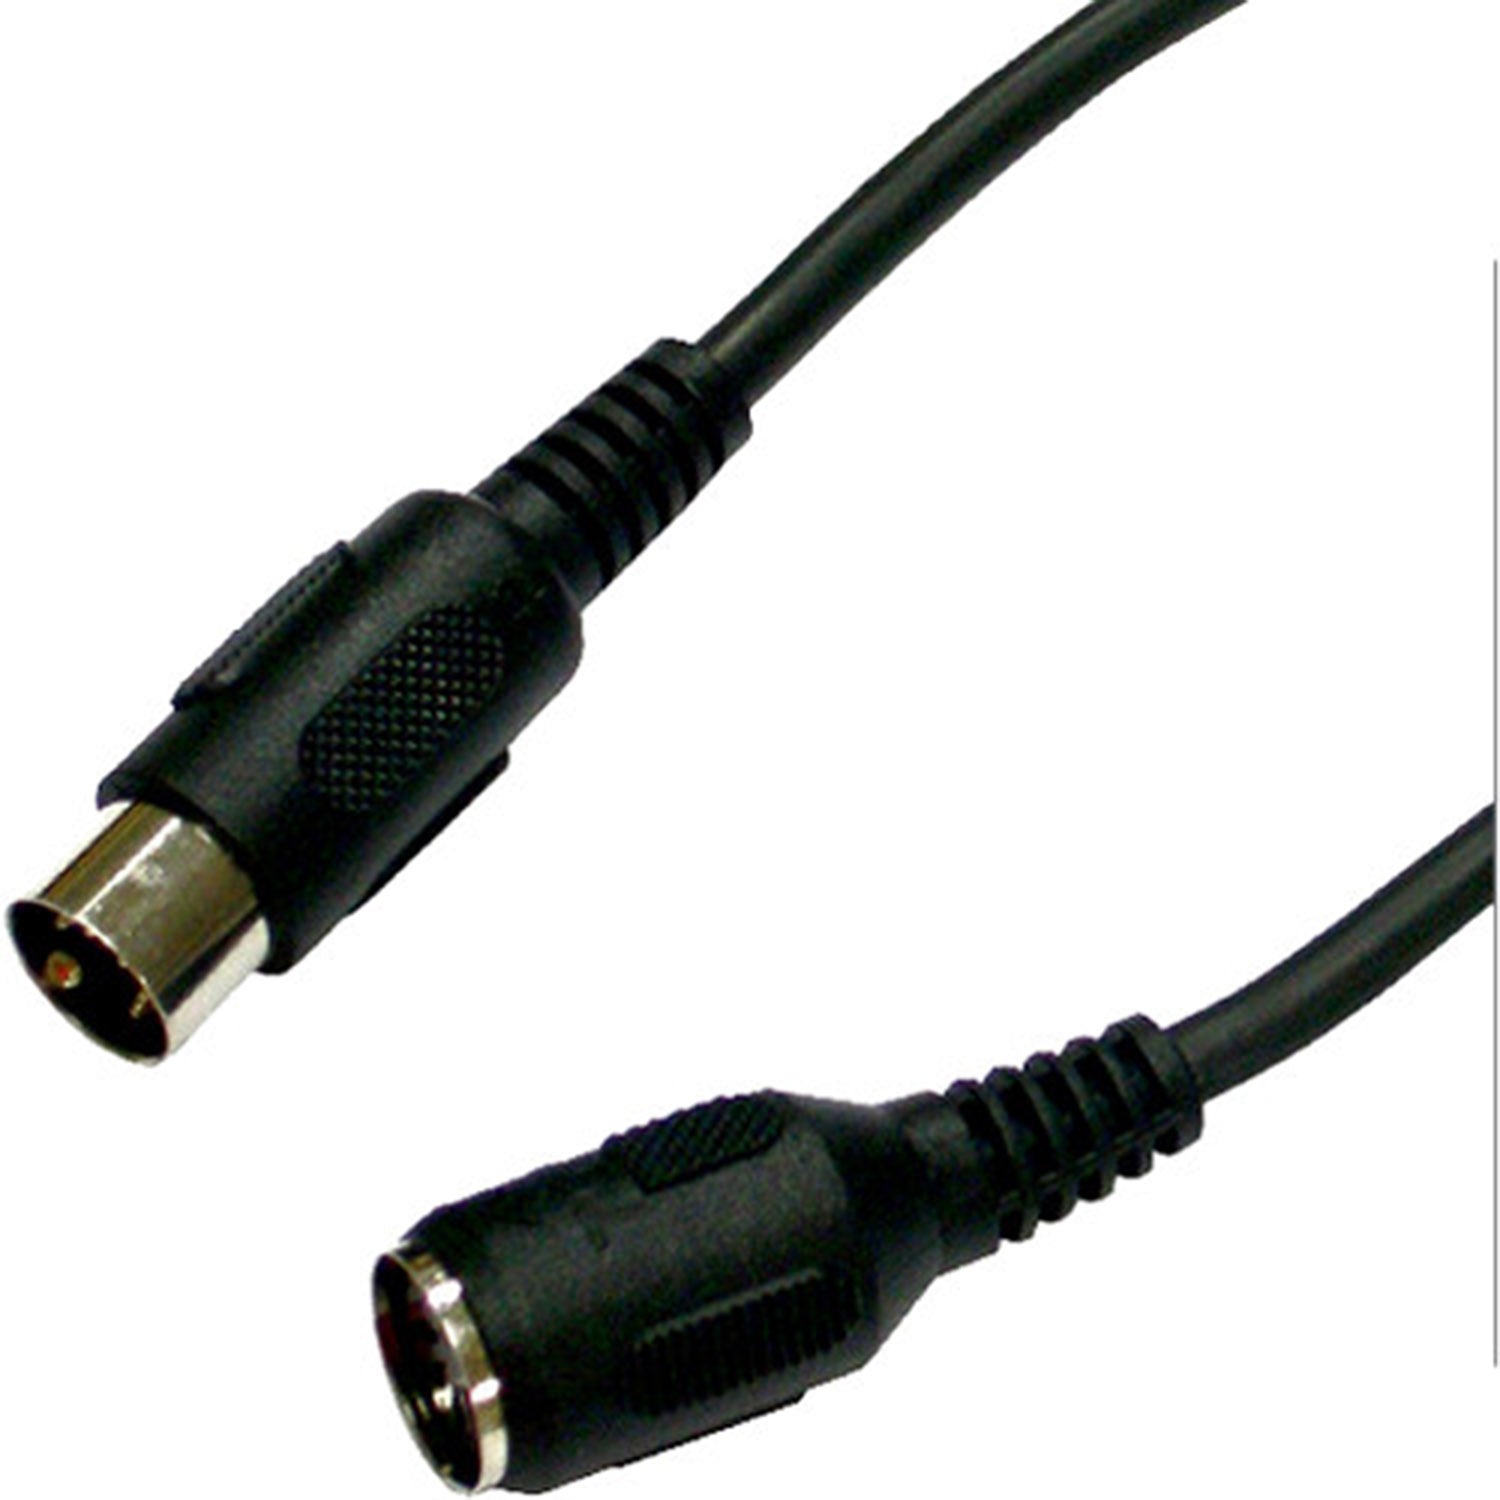 Antari EXT-5, Extension Cable with 5-Pin DIN Connectors - 25 FT - Hollywood DJ